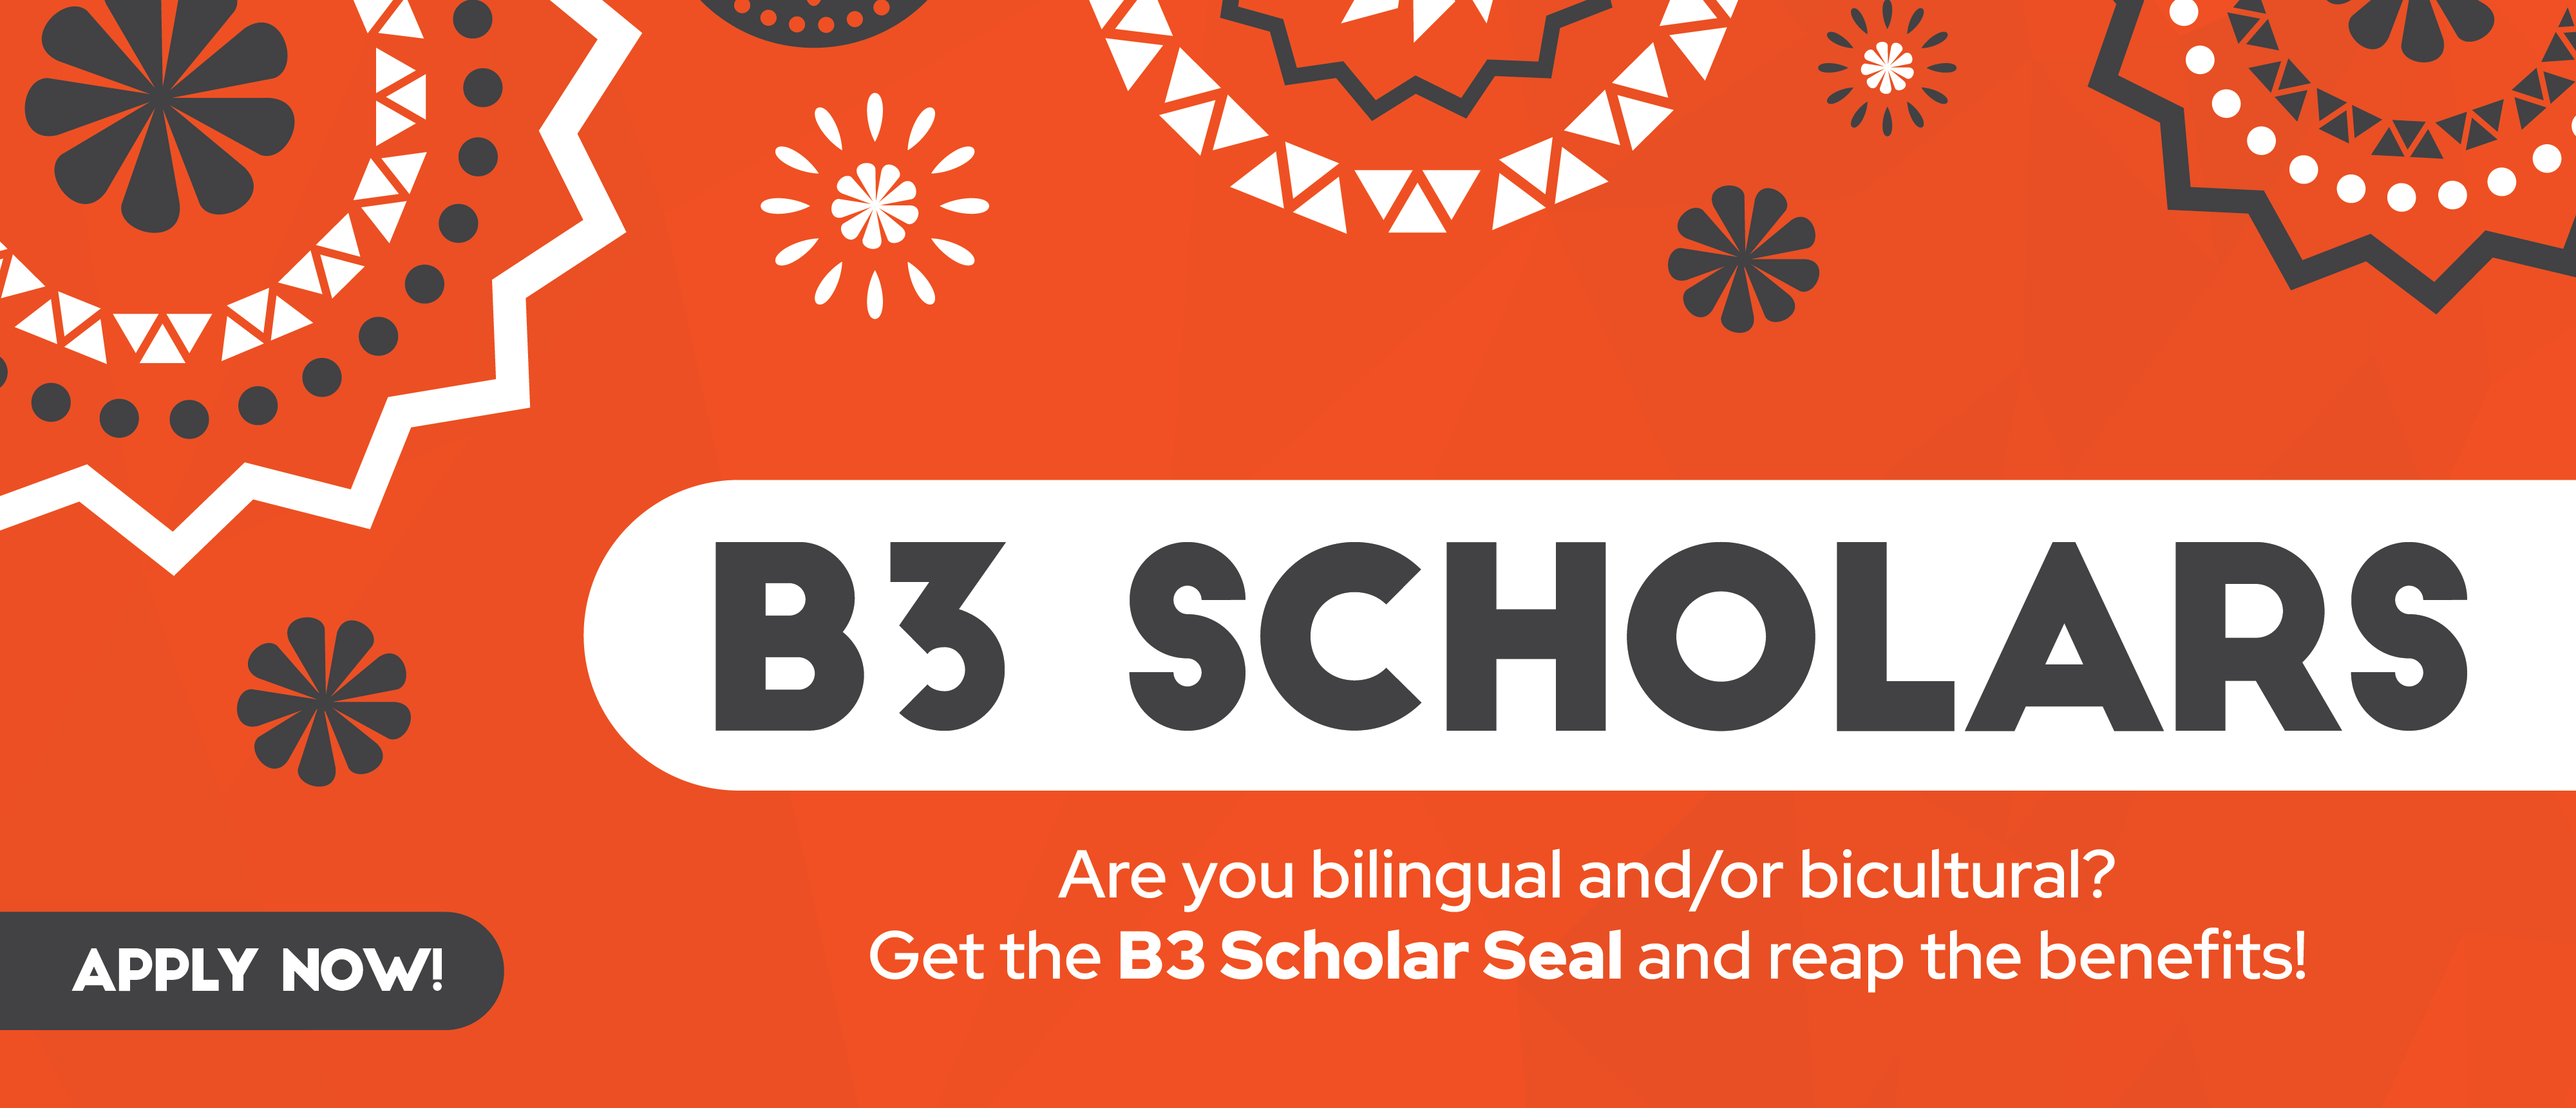 B3 Scholars Apply Now. Get the B3 Scholar Seal and reap the benefits